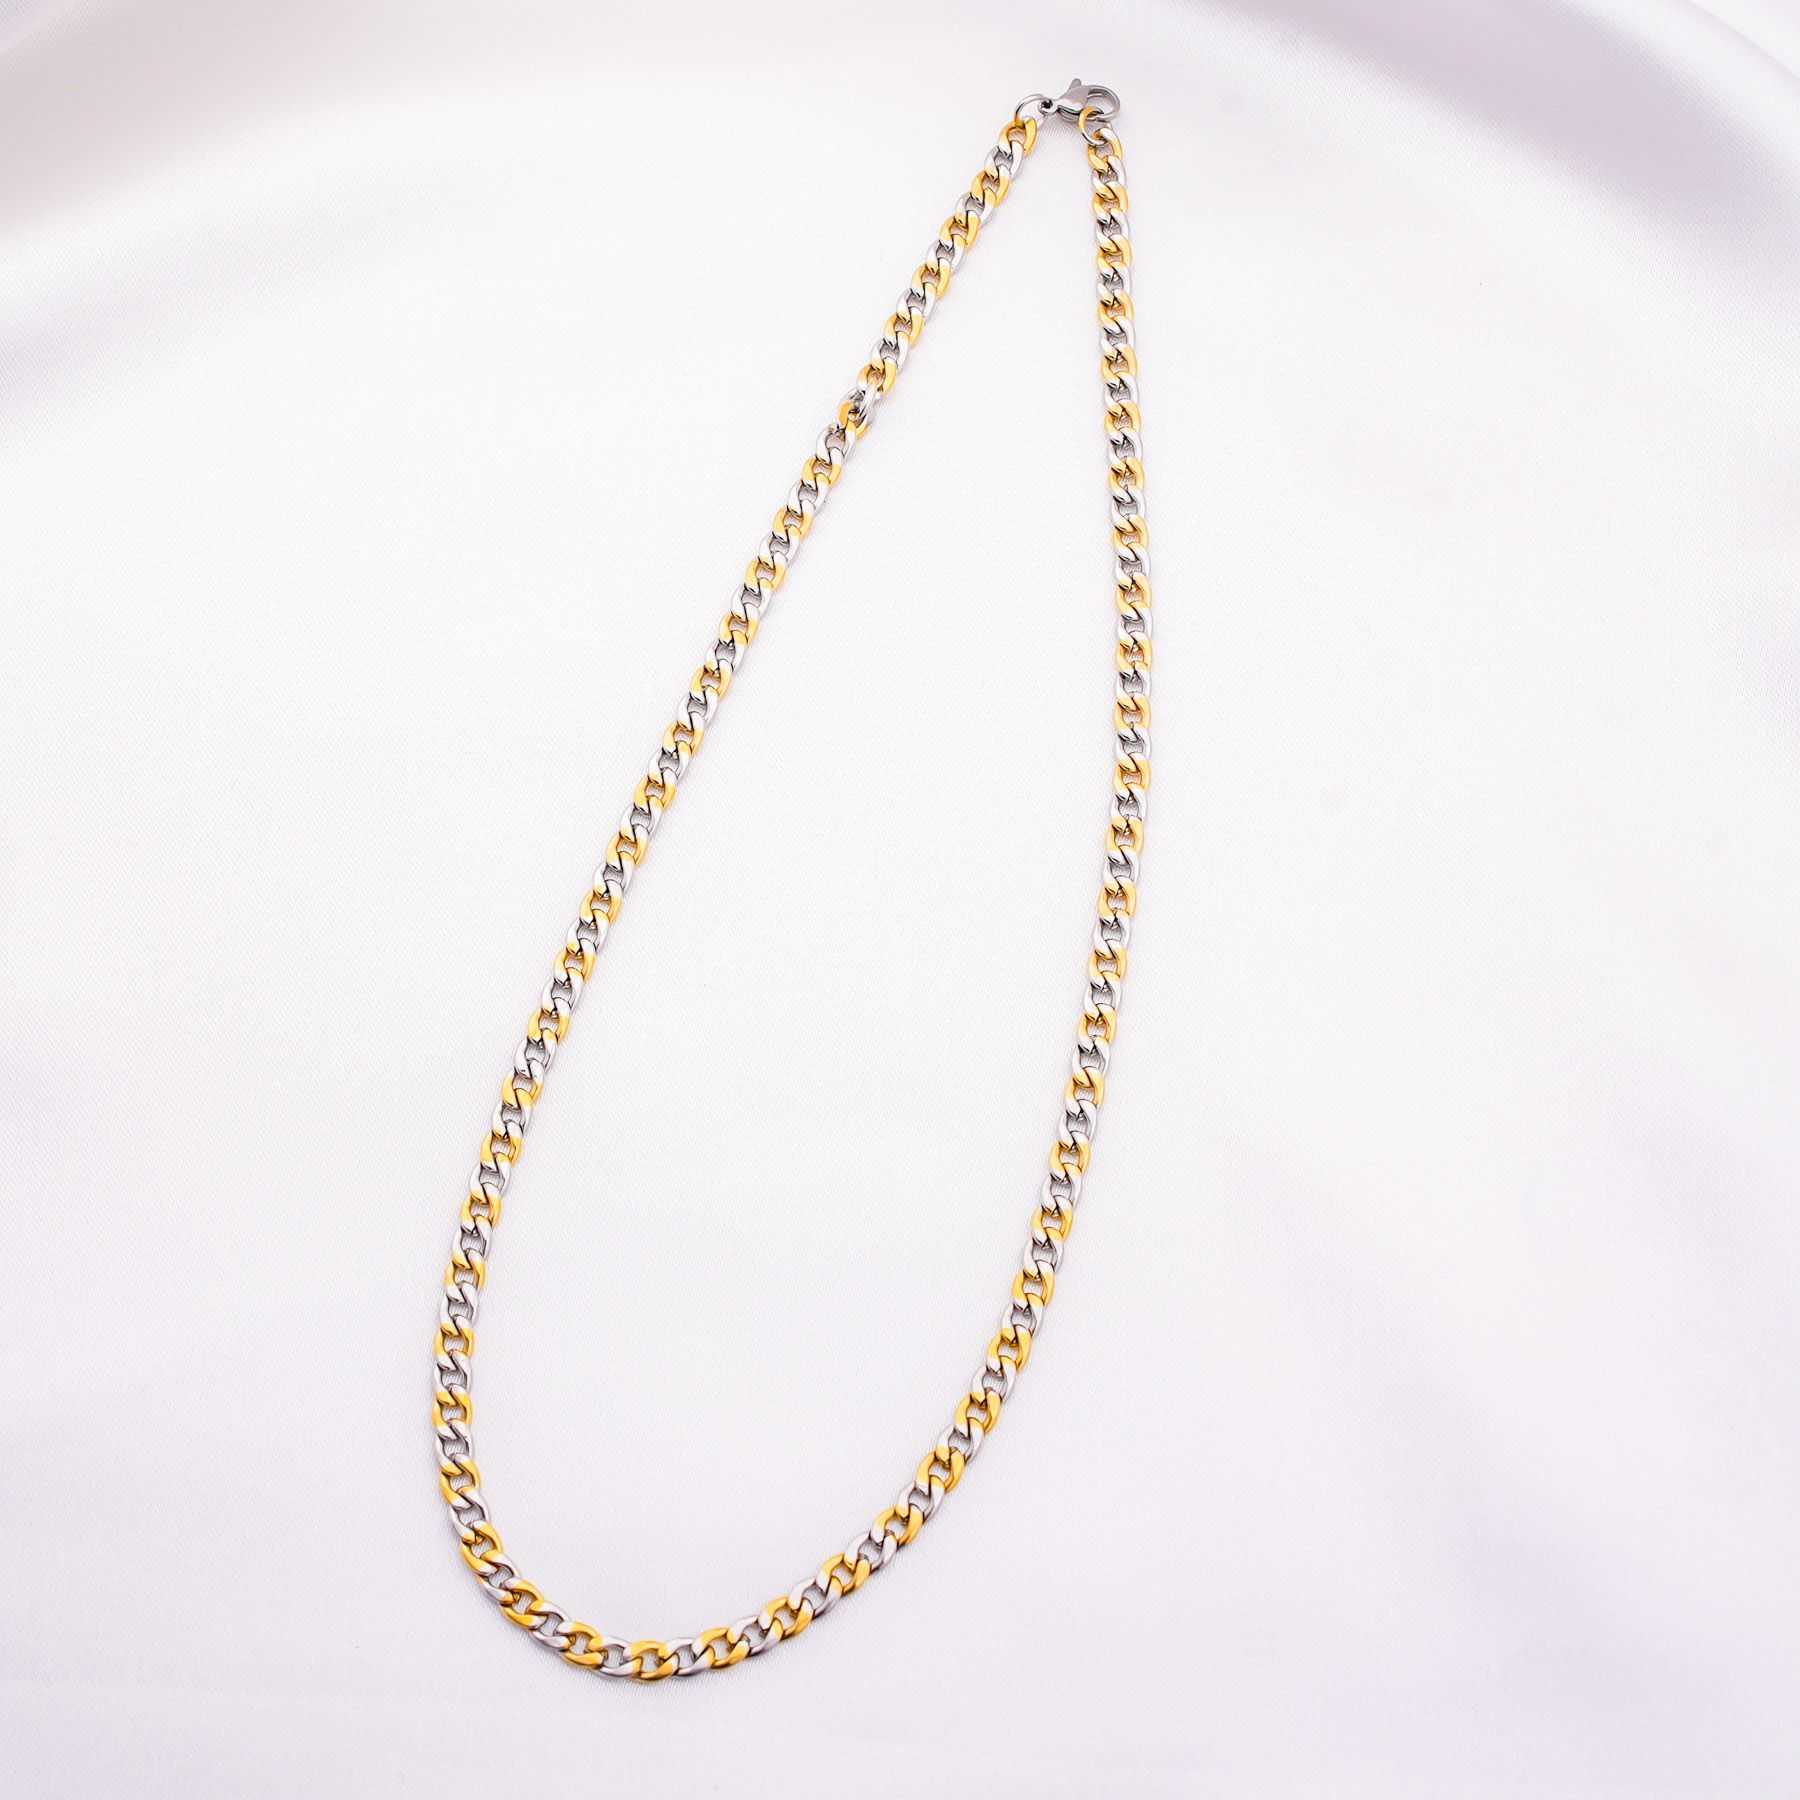 SUMMER CHAIN NECKLACE - SILVER & GOLD